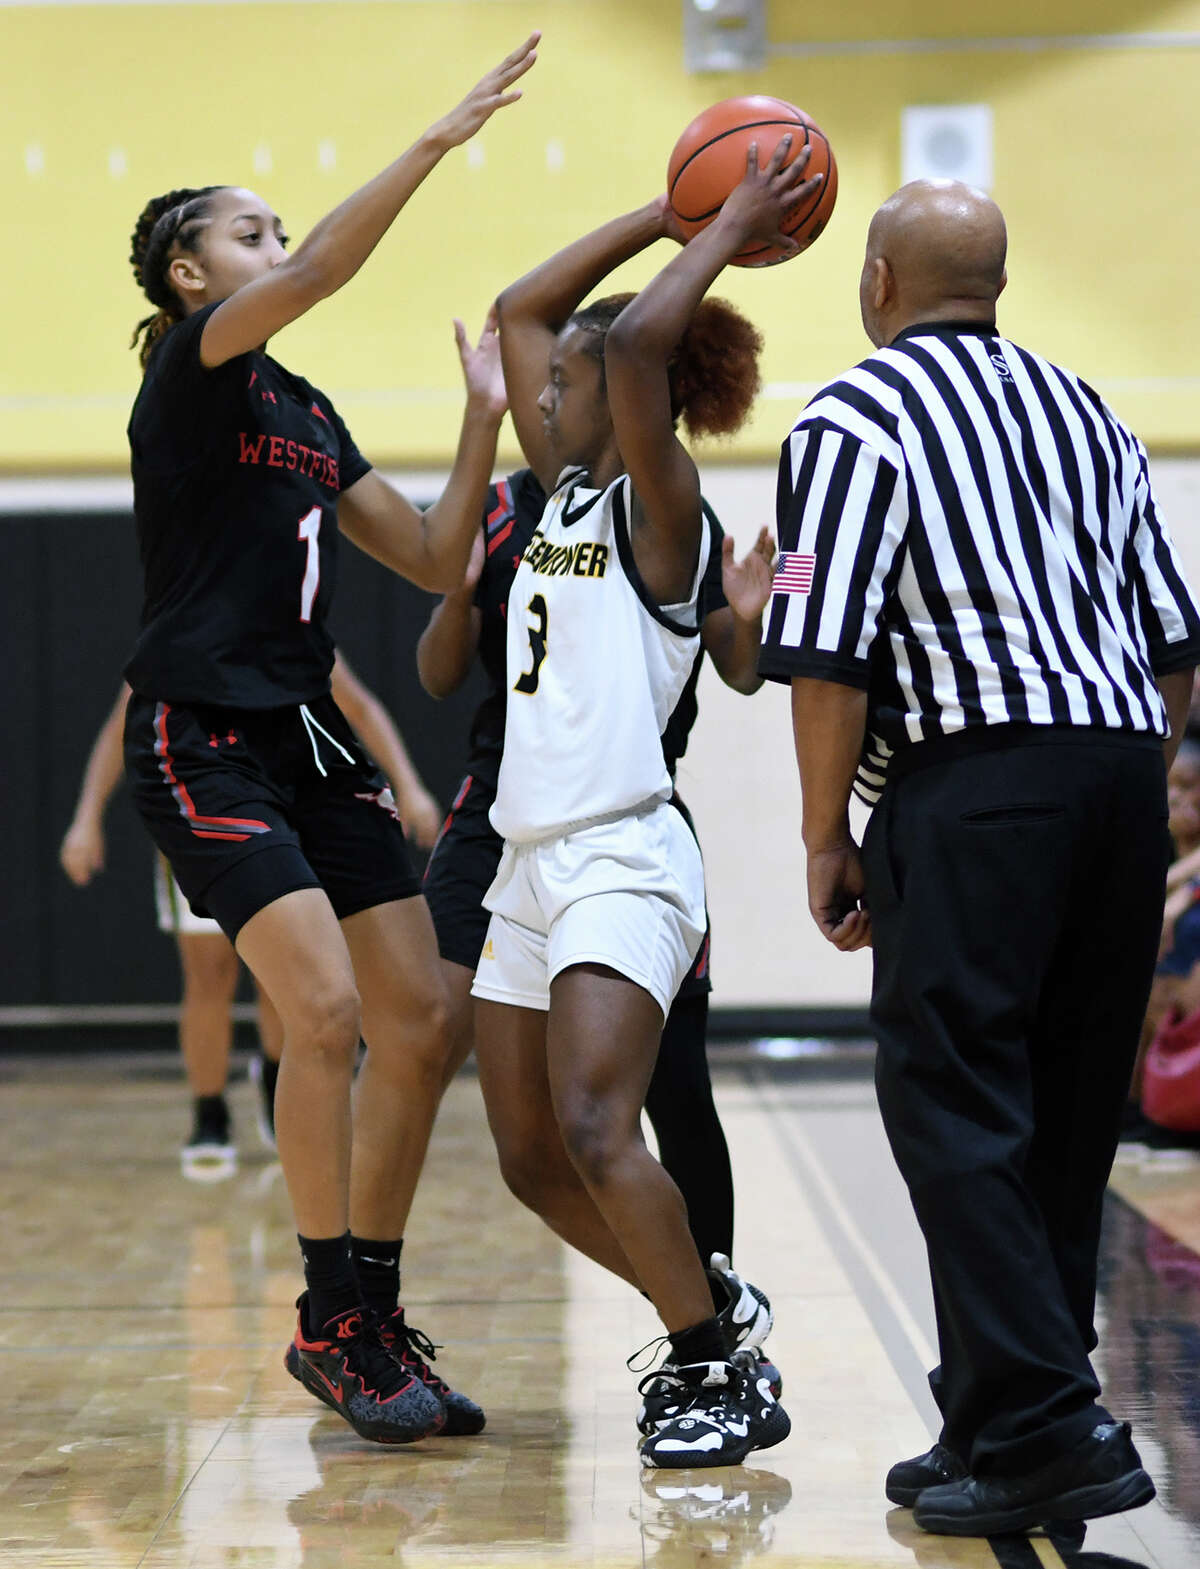 Westfield senior guard Kierra Merchant (1) plays tight defense against Eisenhower senior guard Keyara Ford (3) during the first quarter of their matchup at Eisenhower High School on Tuesday night, January 3, 2023.